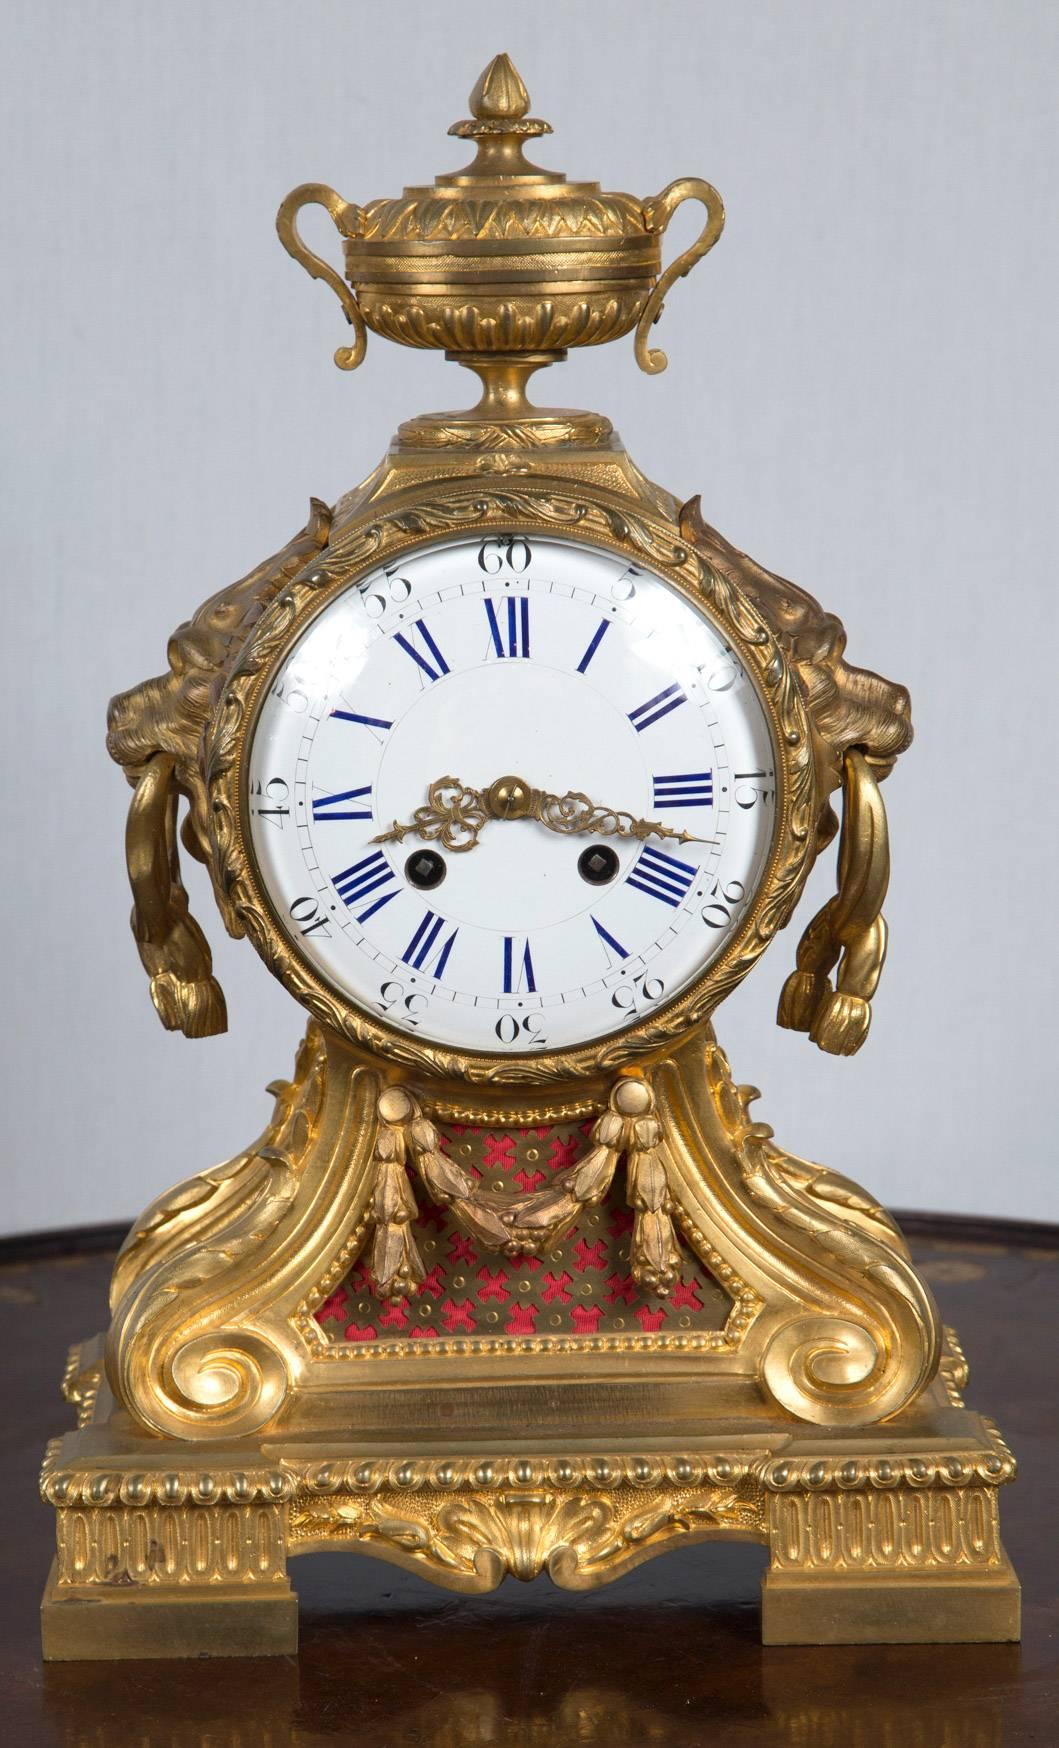 Porcelain dial with blue roman numerals and black Arabic on the outer edge. Gilt bronze case after a design by Le Duc, circa 1770. Red cloth behind cut brass. The case in mercury gilt.
Works are signed Rollin (19th century replacements)
Design for